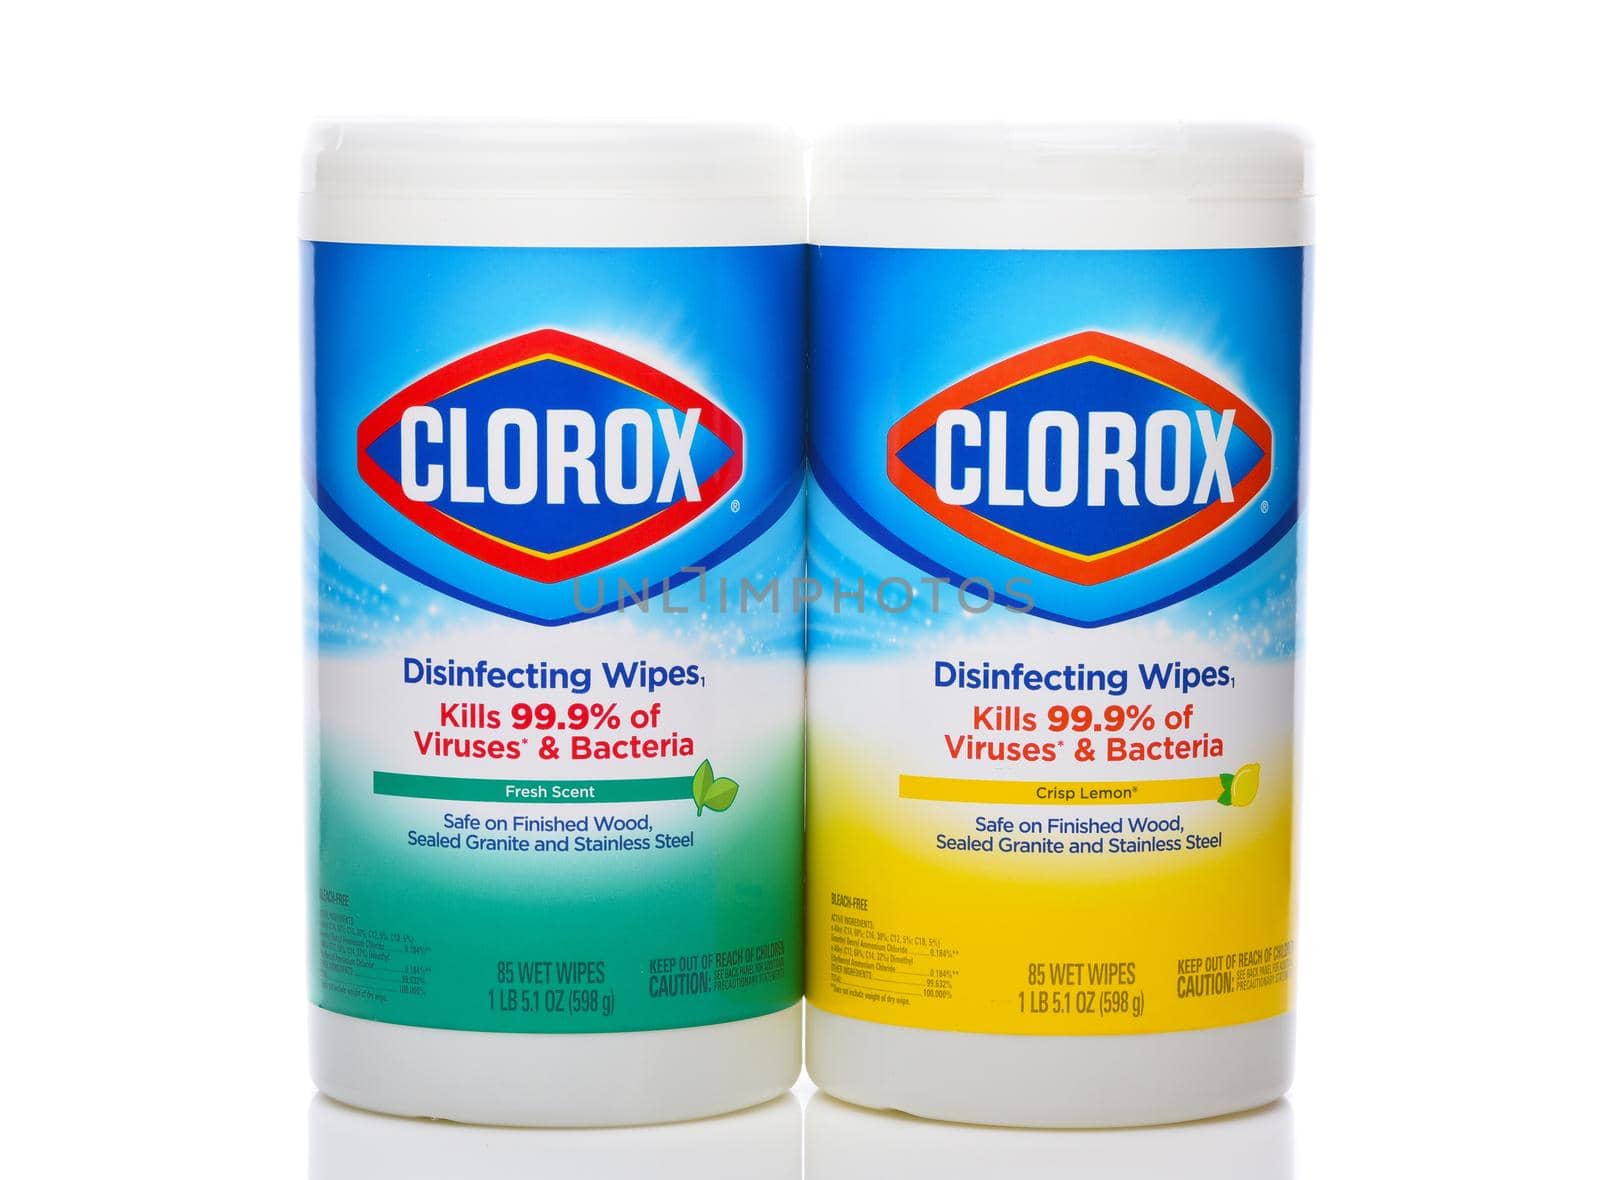 IRVINE, CALIFORNIA - 26 APRIL 2020:  Two Packages of Clorox Disinfecting Wipes, Fresh Scent and Crisp Lemon, to kill Bacteria and Viruses.